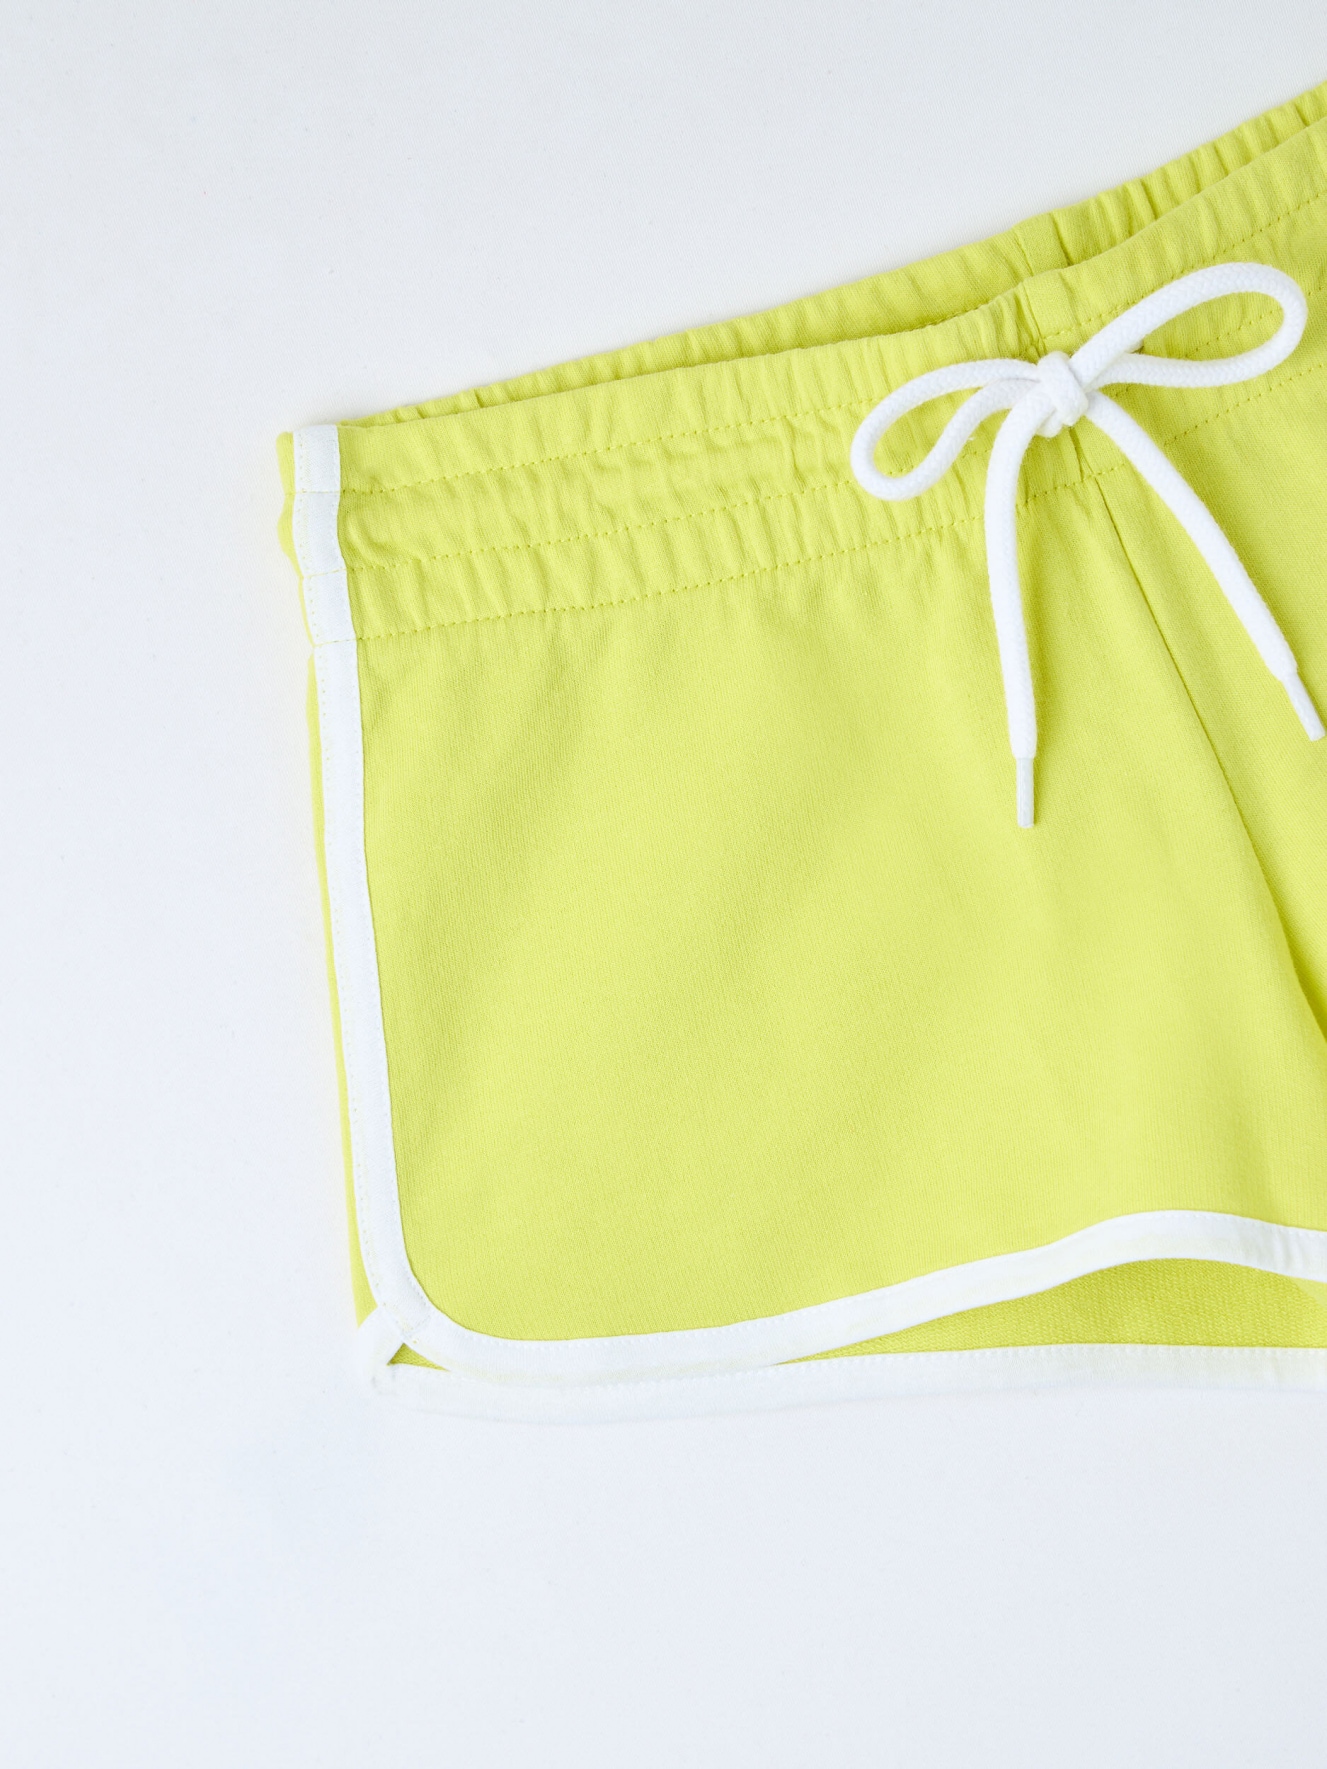 Lime Plush shorts with contrasting trim - Buy Online